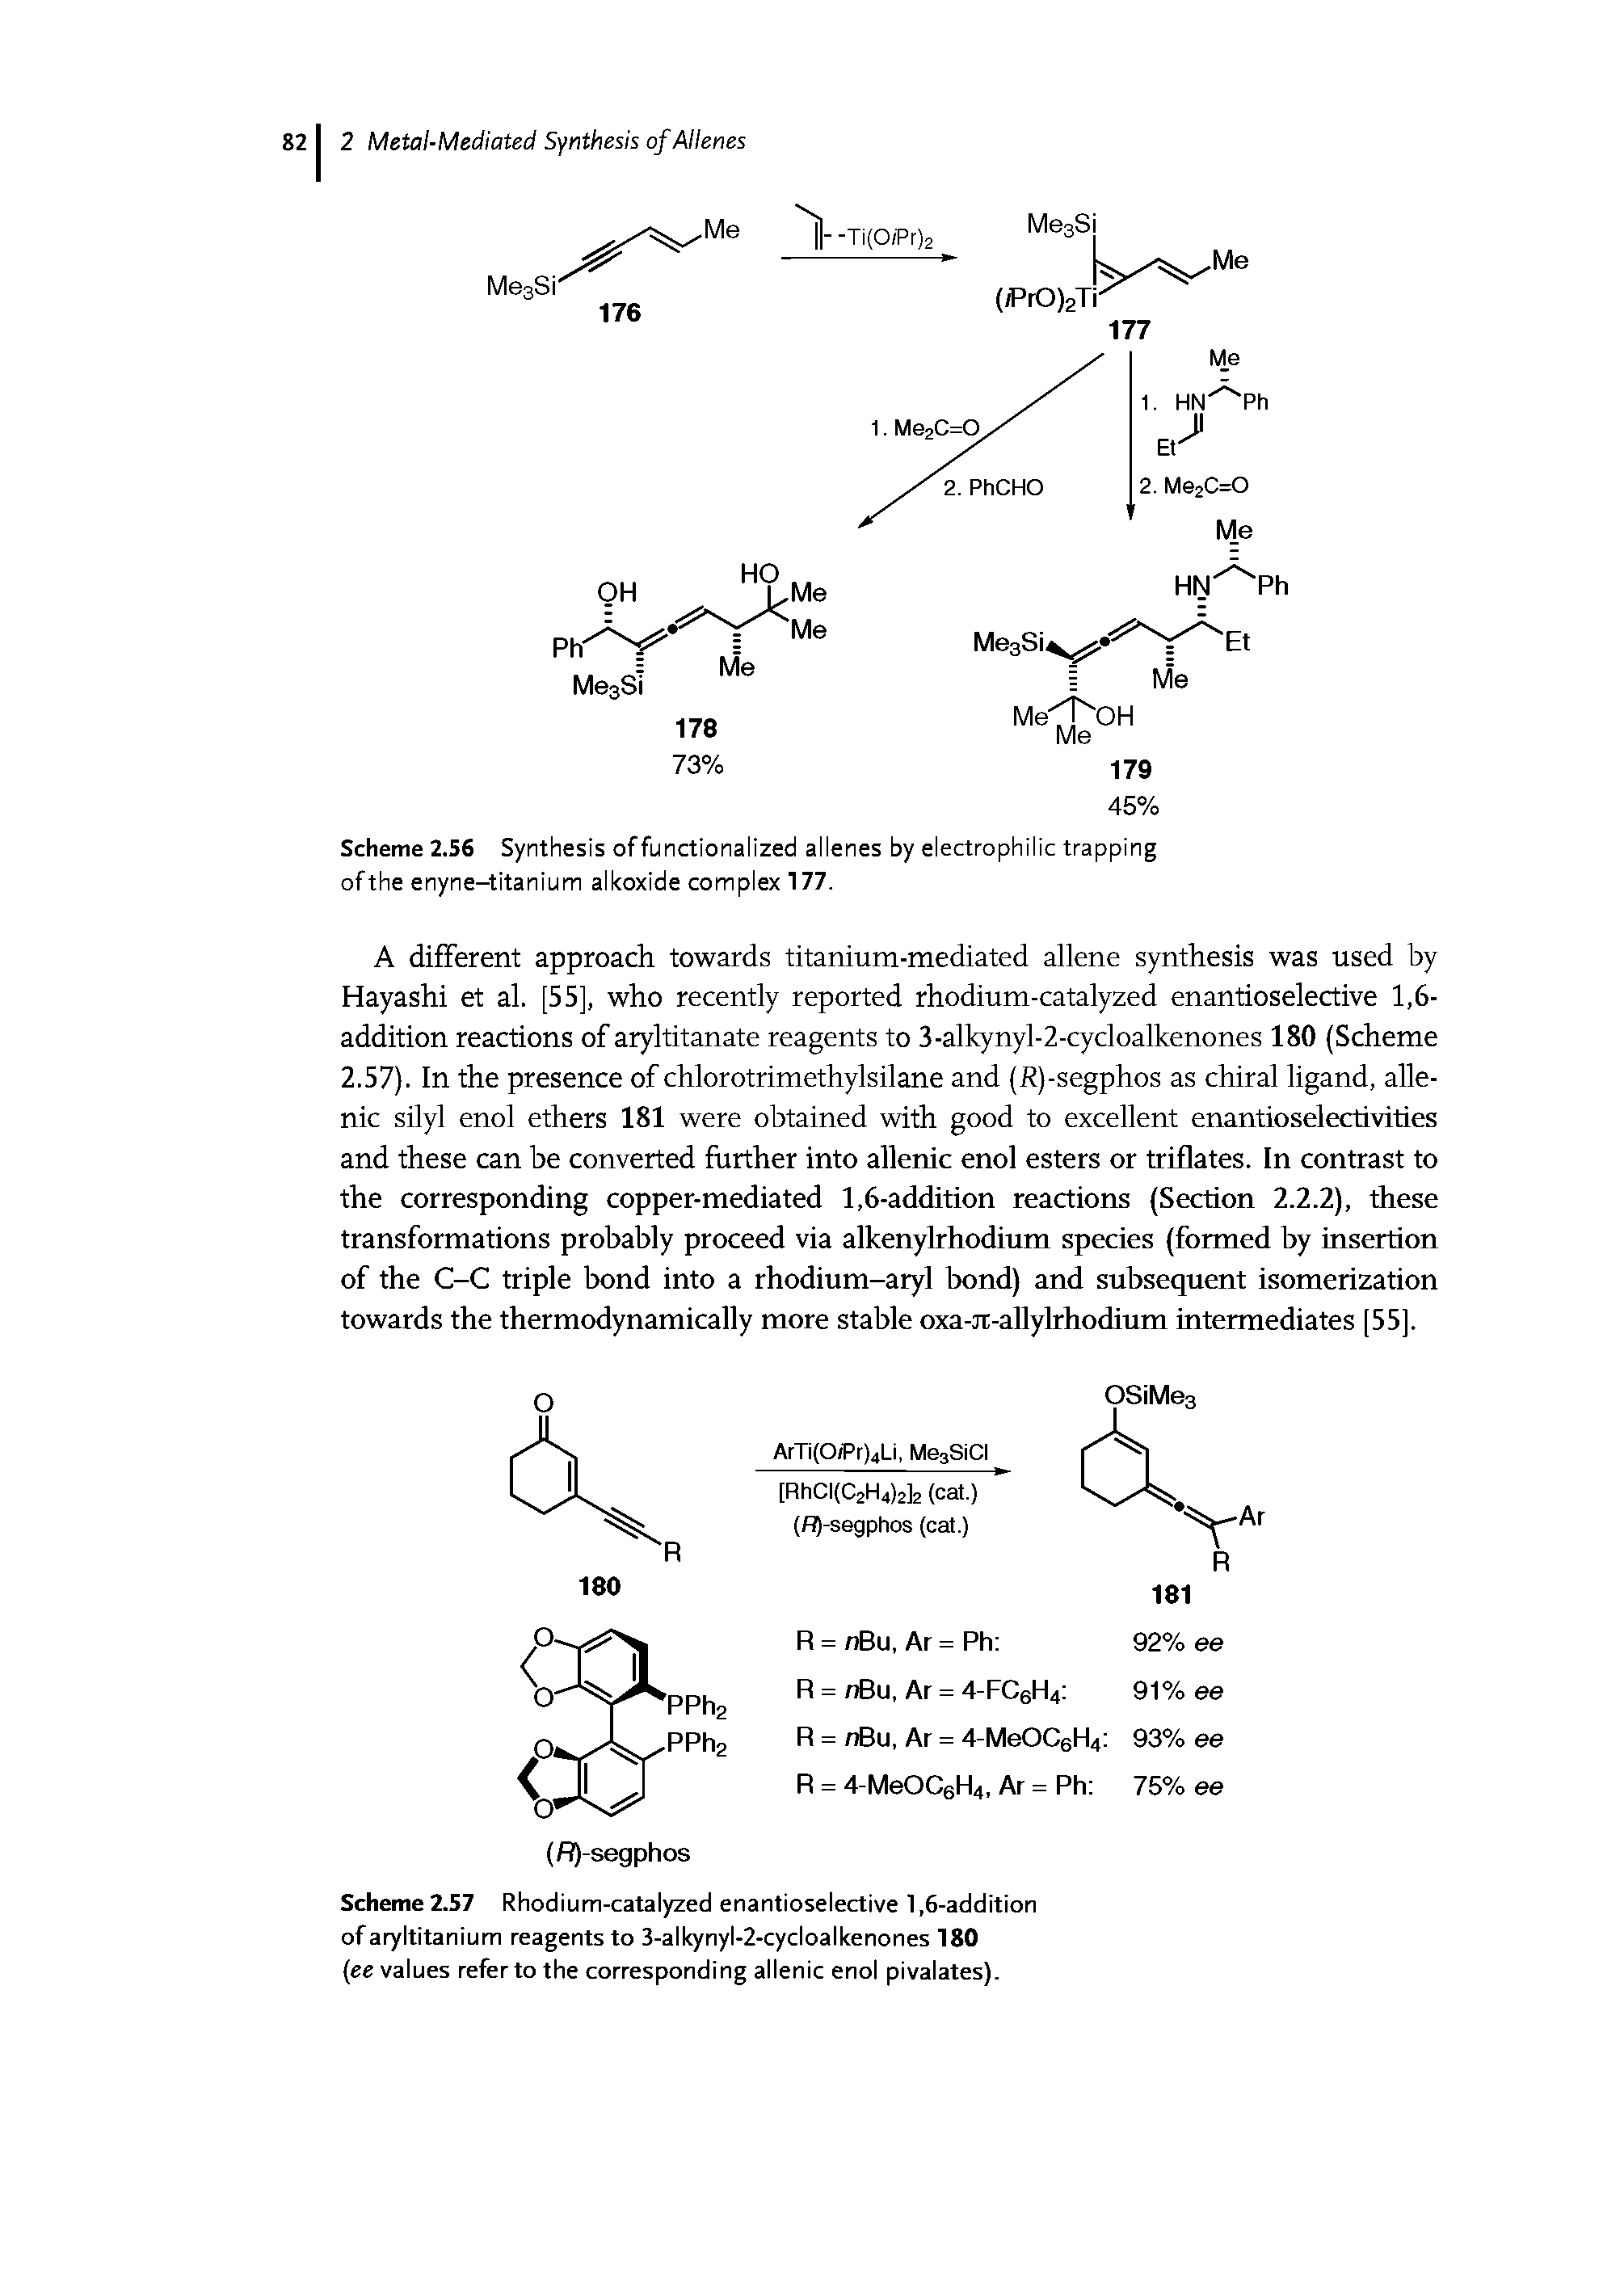 Scheme 2.56 Synthesis of functionalized allenes by electrophilic trapping ofthe enyne-titanium alkoxide complex 177.